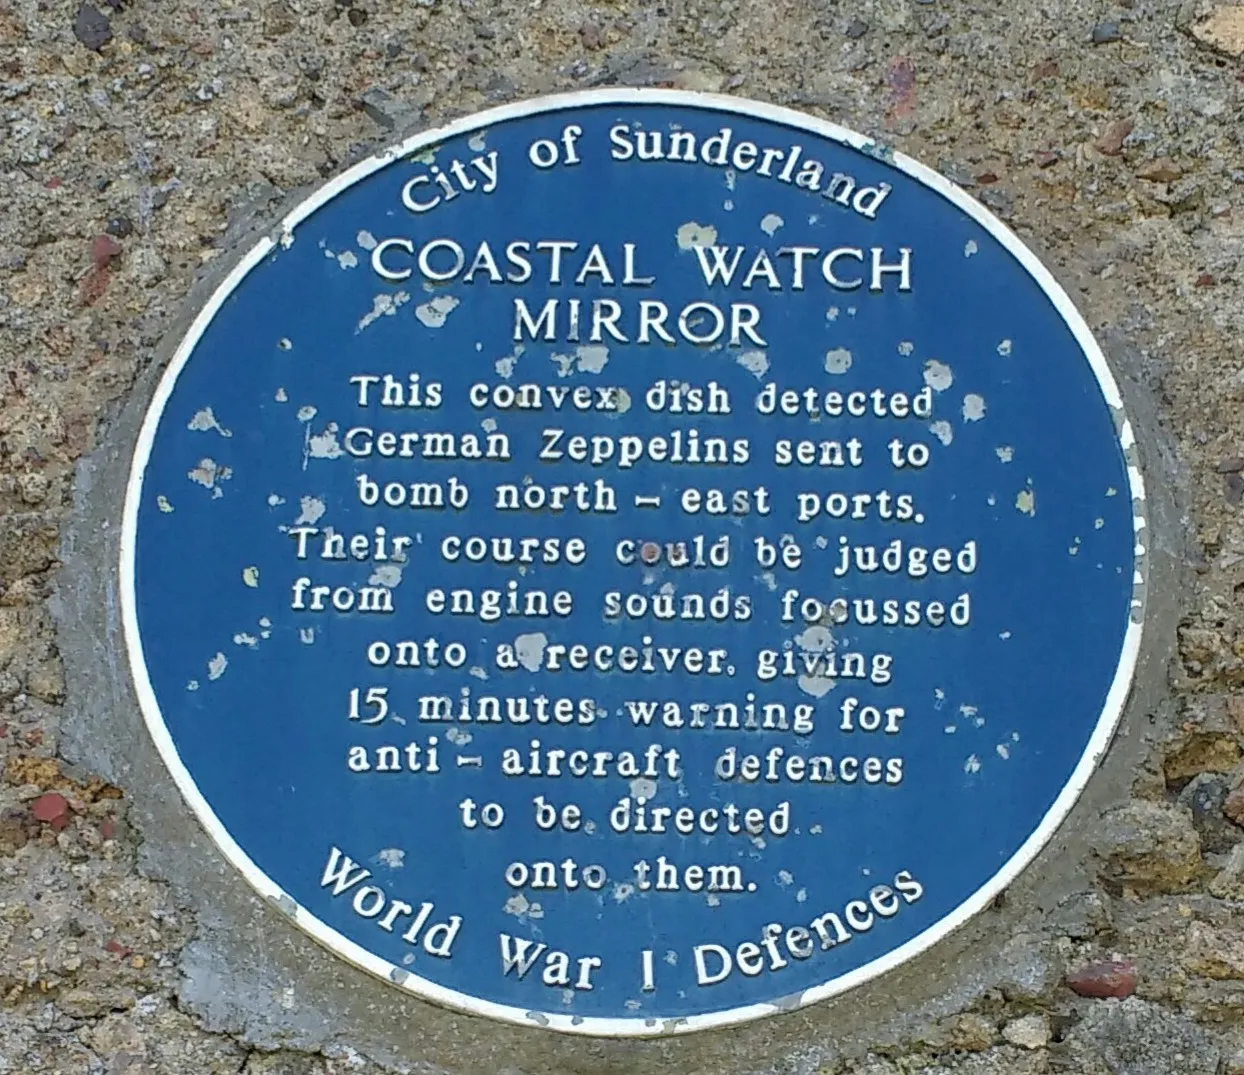 Photo showing: Plaque reads:
"City of Sunderland
Coastal Watch Mirror
This convex dish detected German Zeppelins sent to bomb north-east ports. Their course could be judged from engine sounds focussed onto a receiver, giving 15 minutes warning for anti-aircraft defences to be directed onto them.

World War I Defences"